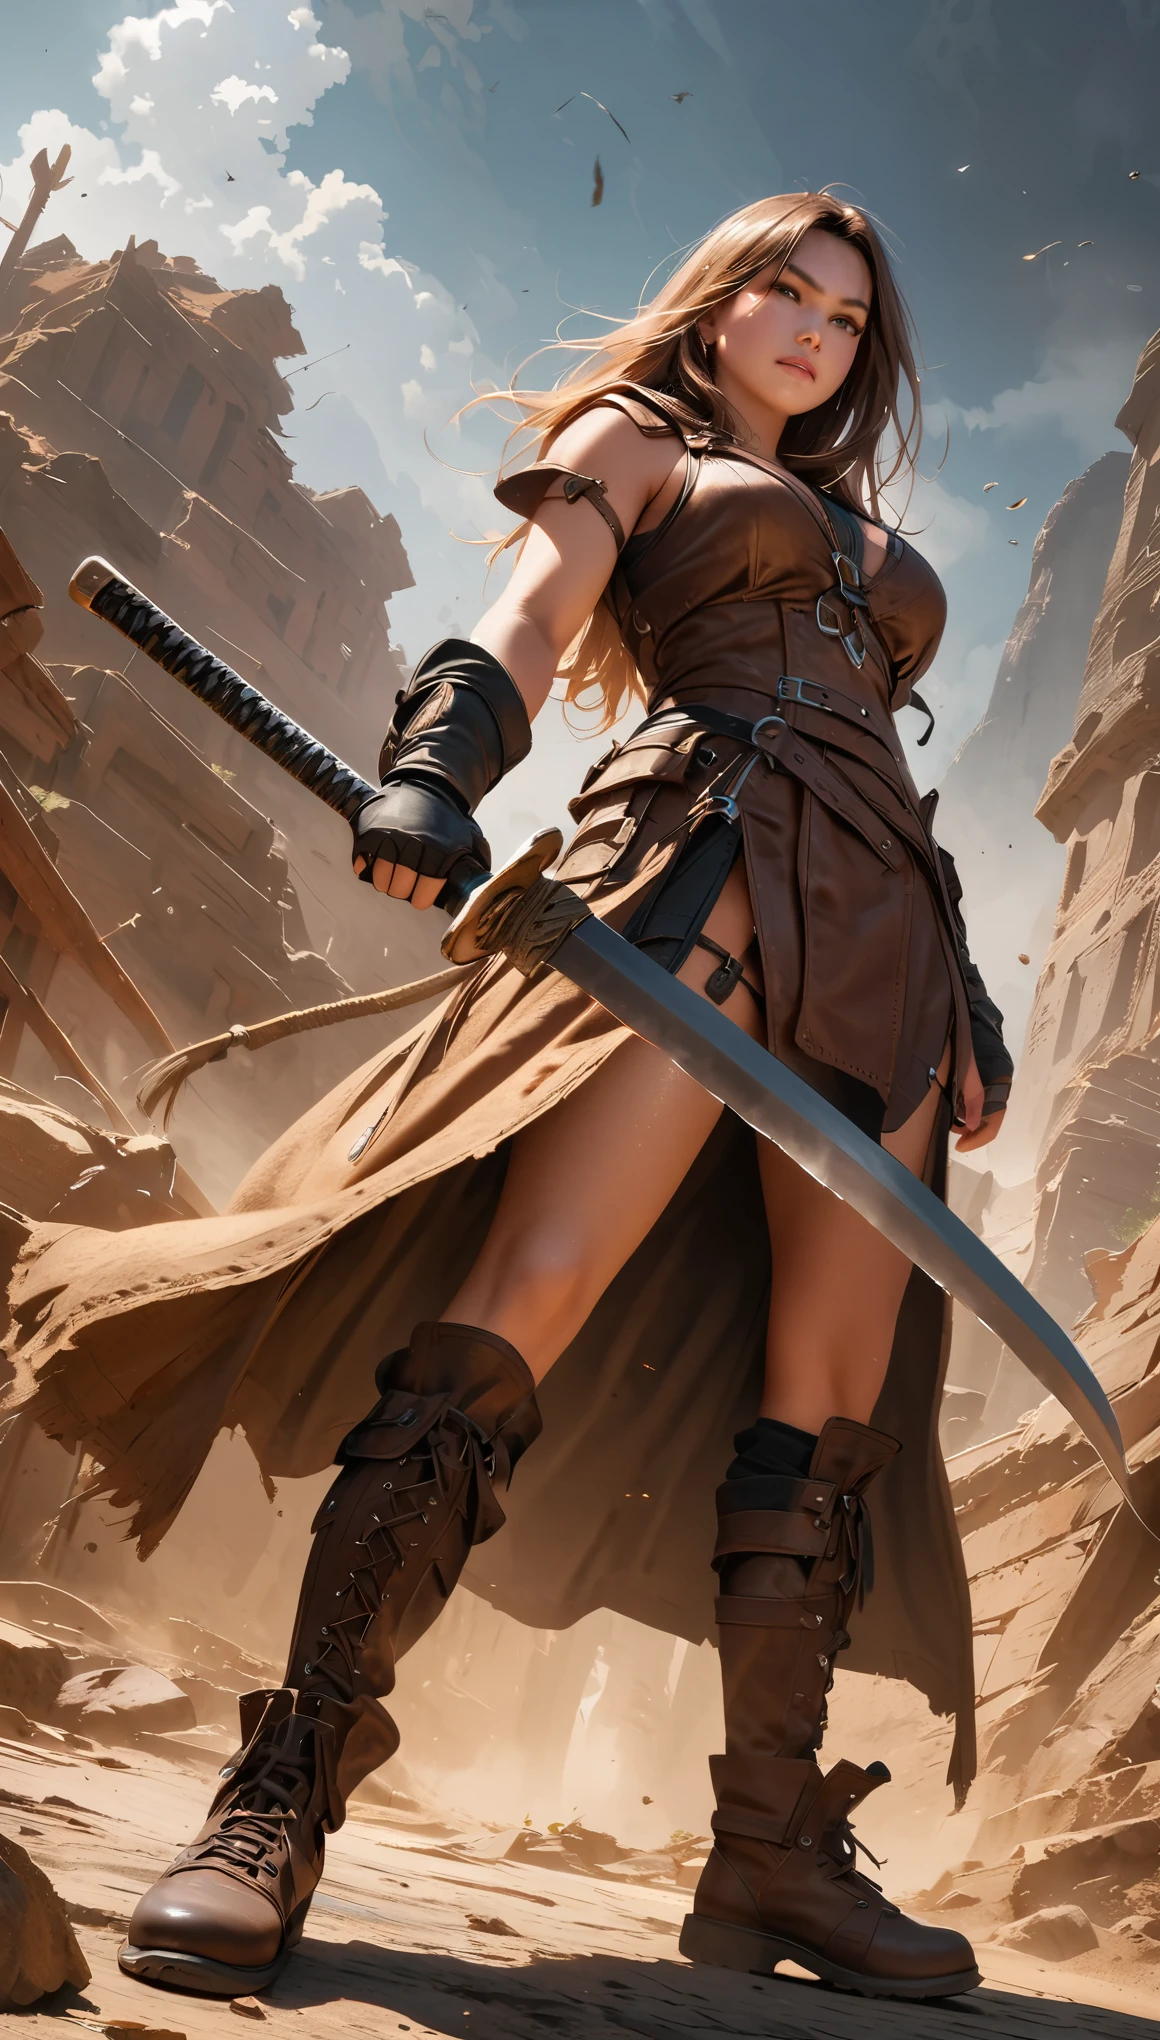 analog style, high resolution, (((masterpiece))), (full body shot:1.3), (low angle shot:1.5), swordsman, female, fantasy, barbarian, action pose, very detailed, long hair, holding long two-handed sword, Award-winning movie poster, (((photorealistic)))